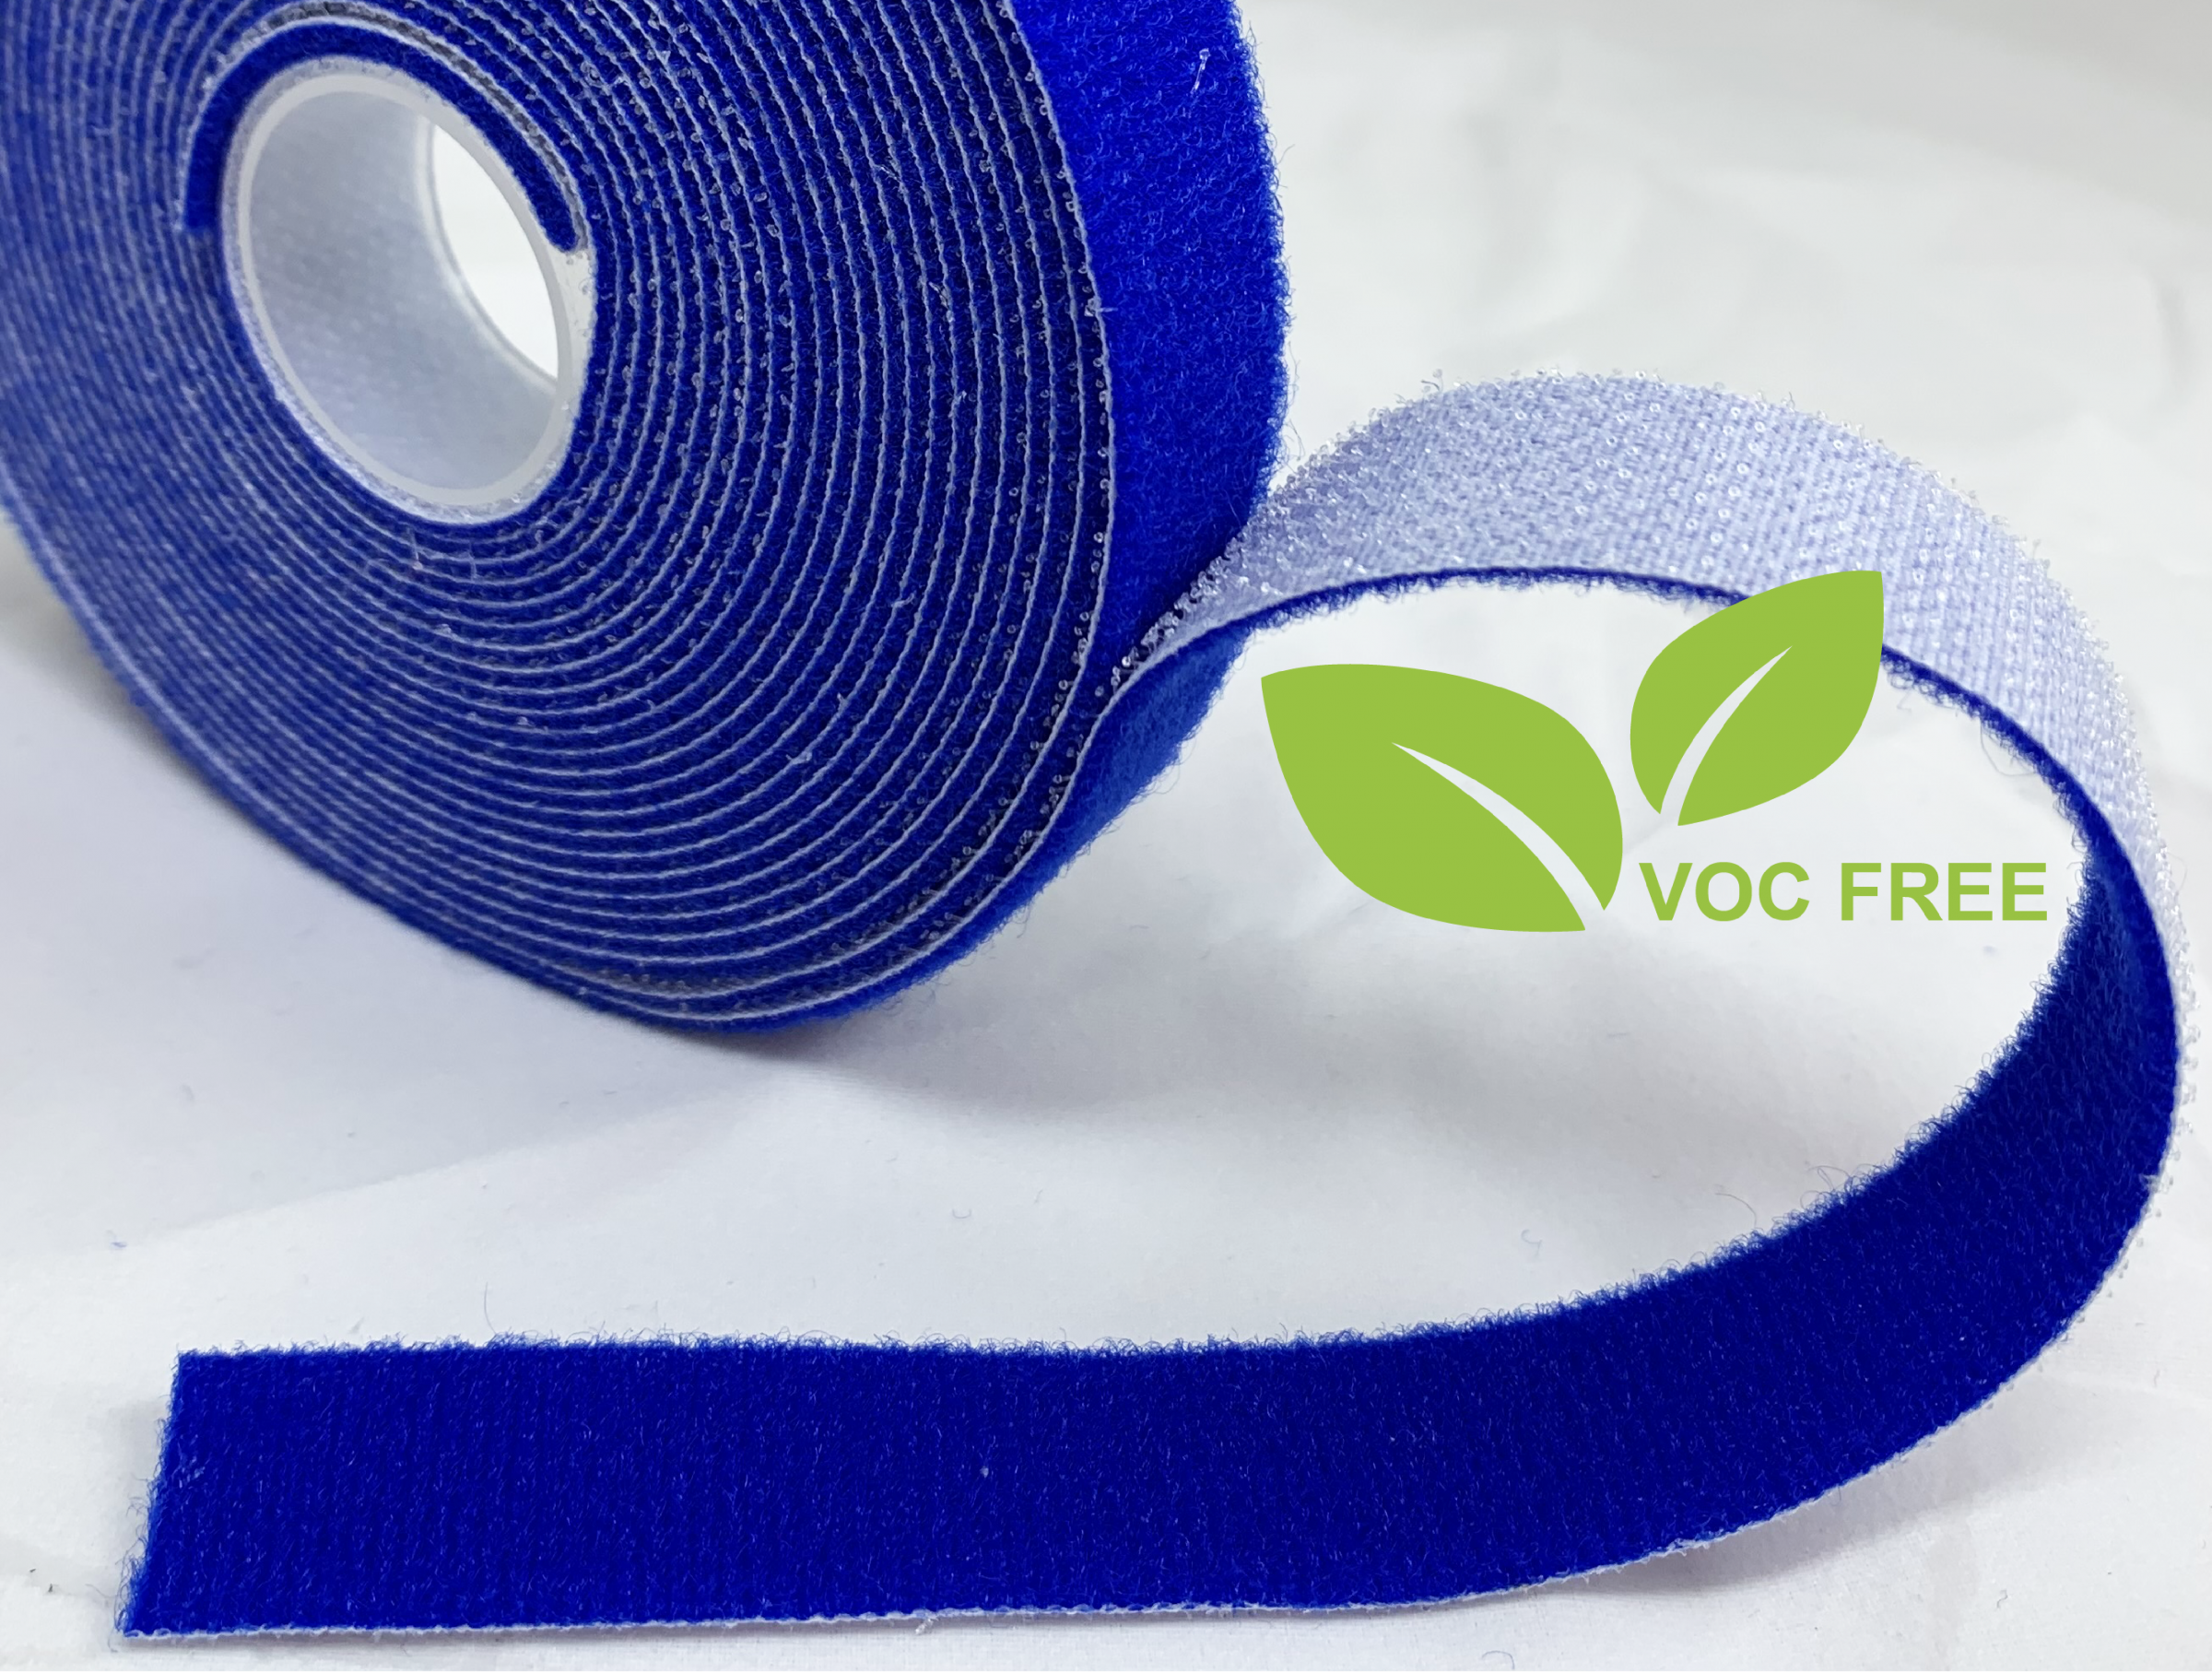 Back to Back Hook and Loop - Back to Back Fastener Tape, Over 50 Years  High-Performance Technical Fabric and Bio Rubber Sponge Manufacturer